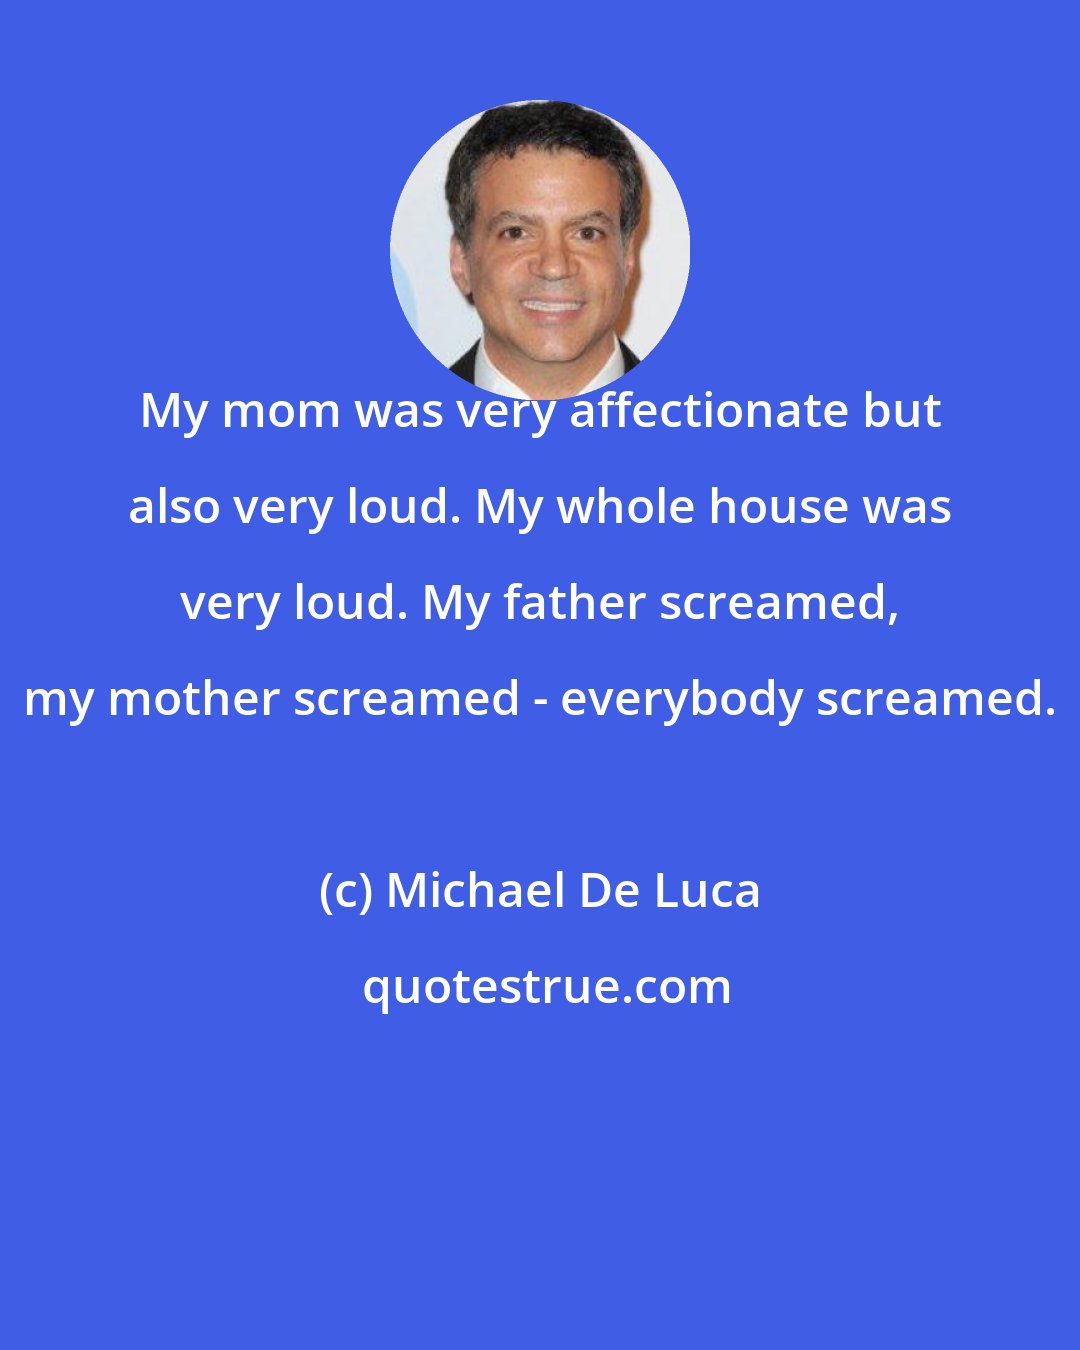 Michael De Luca: My mom was very affectionate but also very loud. My whole house was very loud. My father screamed, my mother screamed - everybody screamed.